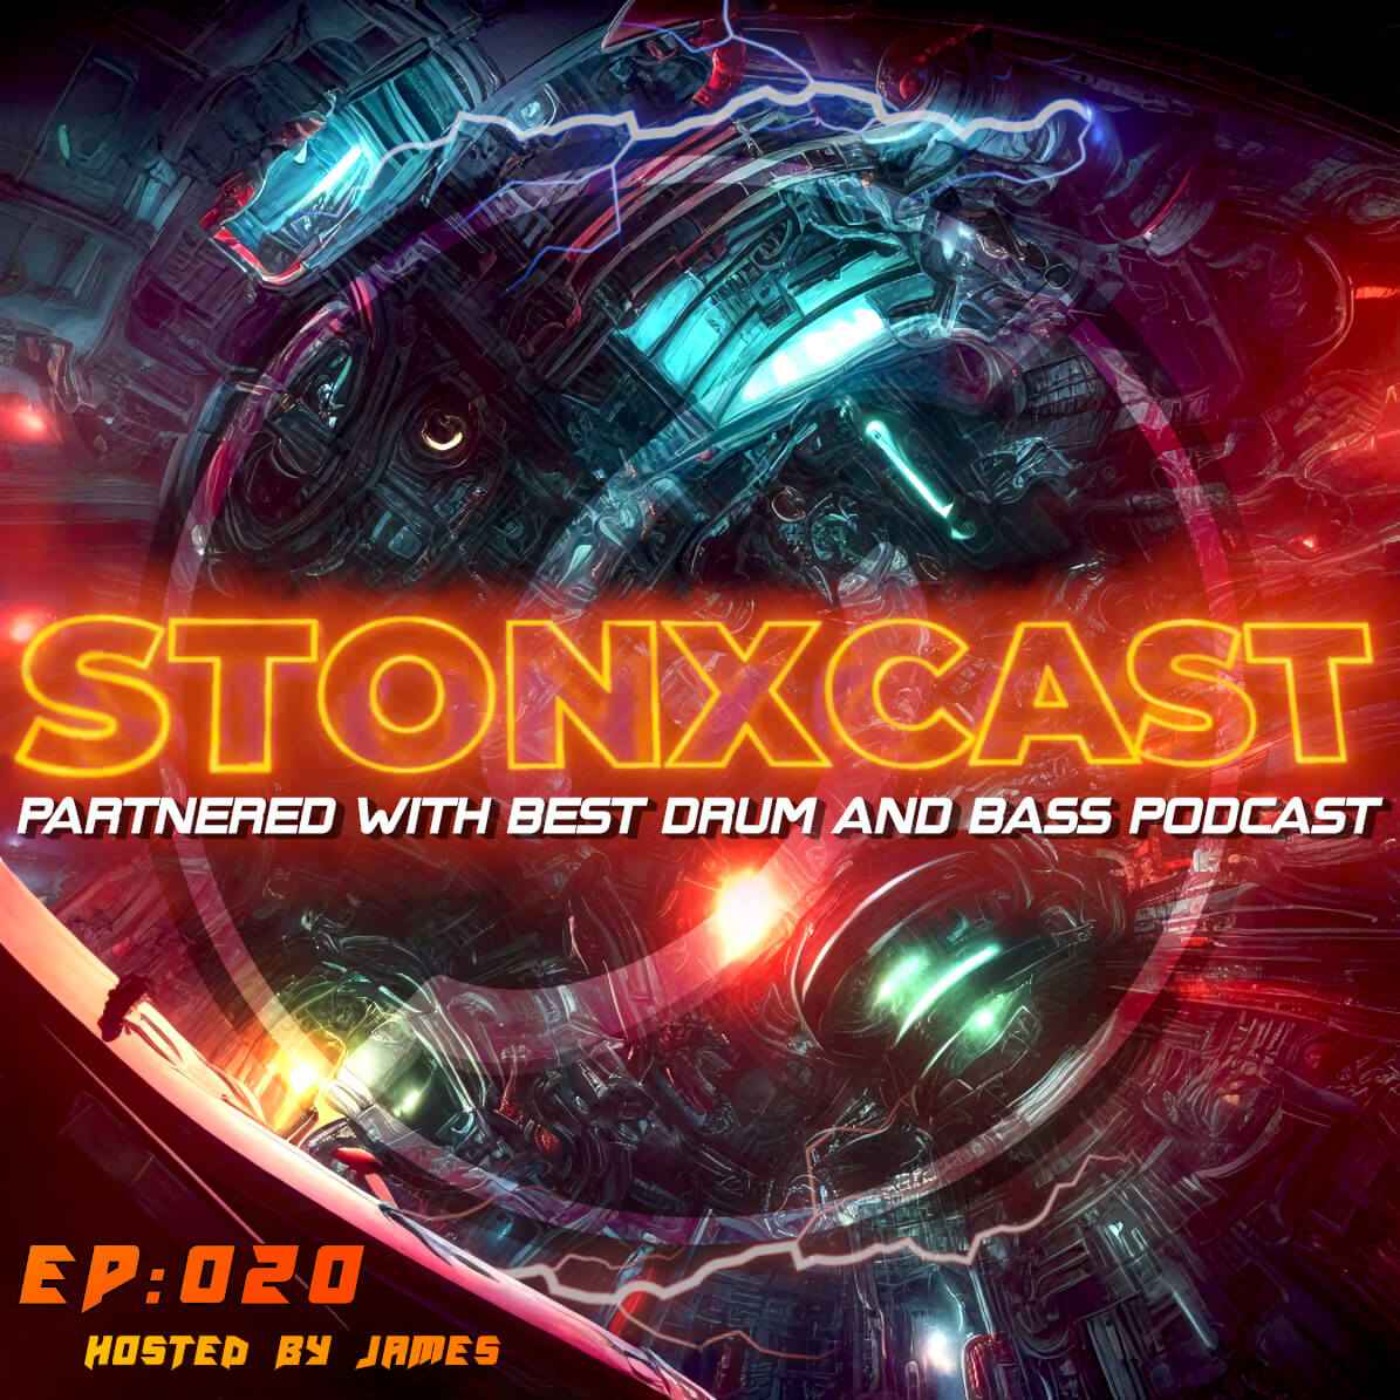  Stonxcast EP:020- Hosted by James Artwork